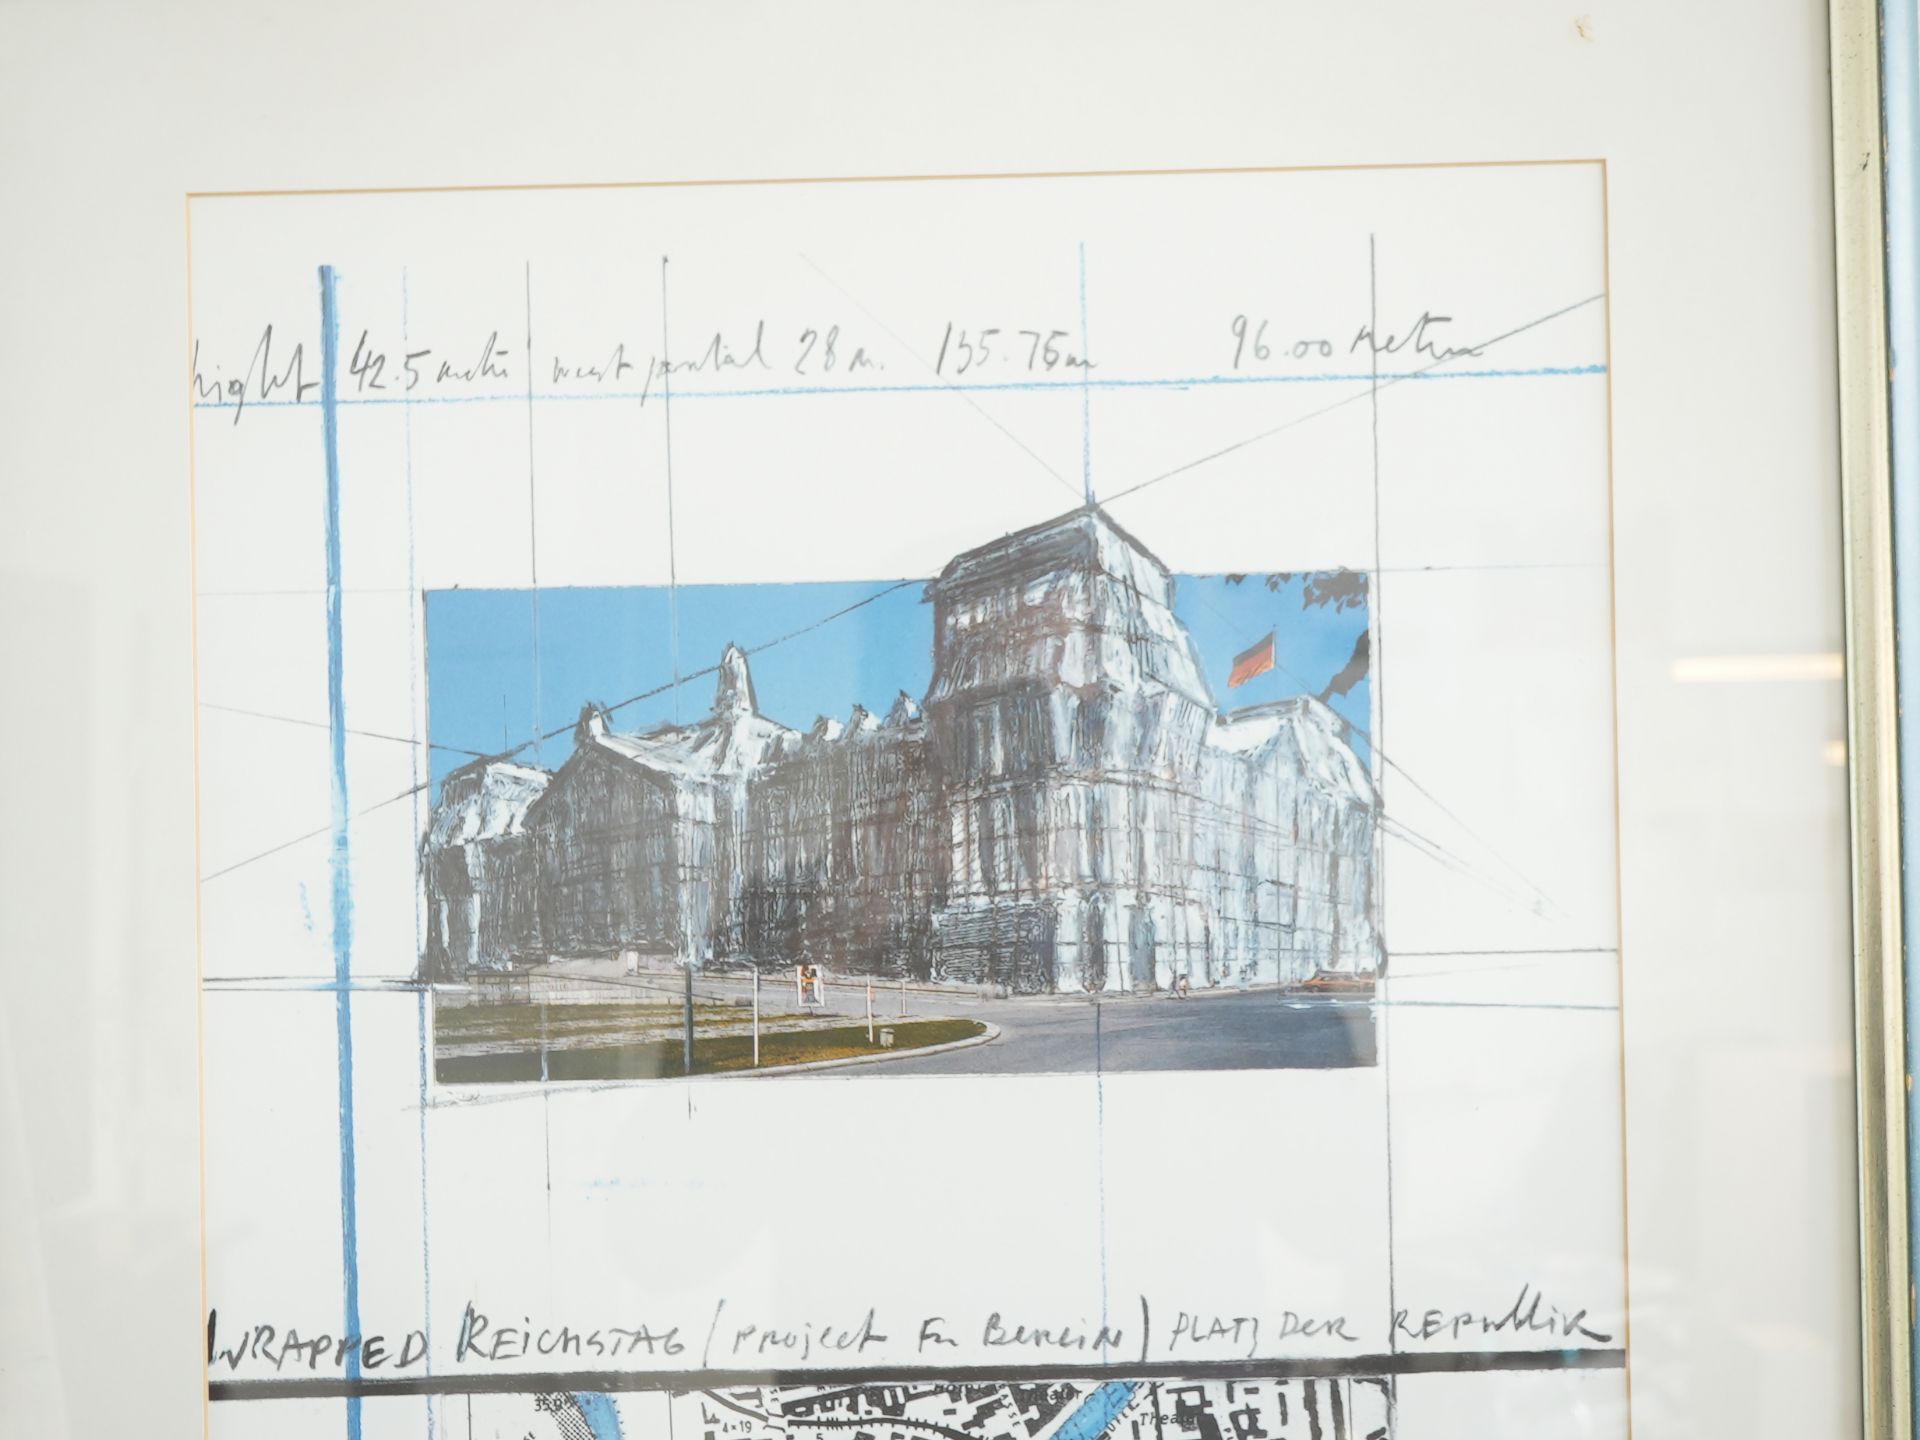 Christo Wrapped Reichstag Litographie - Image 3 of 4